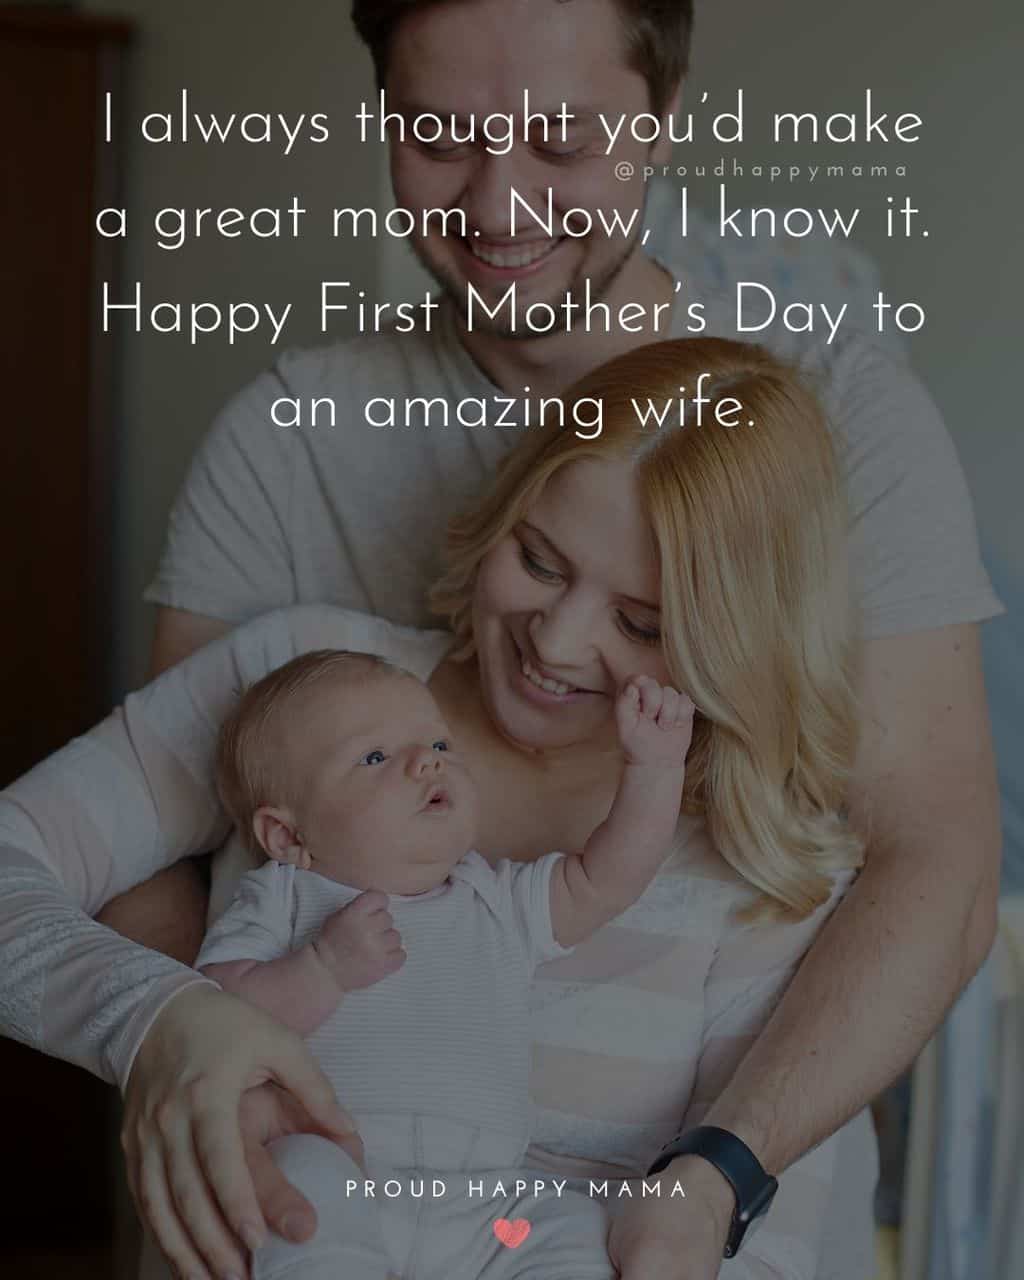 First Mothers Day Quotes - I always thought you’d make a great mom. Now, I know it. Happy First Mother’s Day to an amazing wife.’